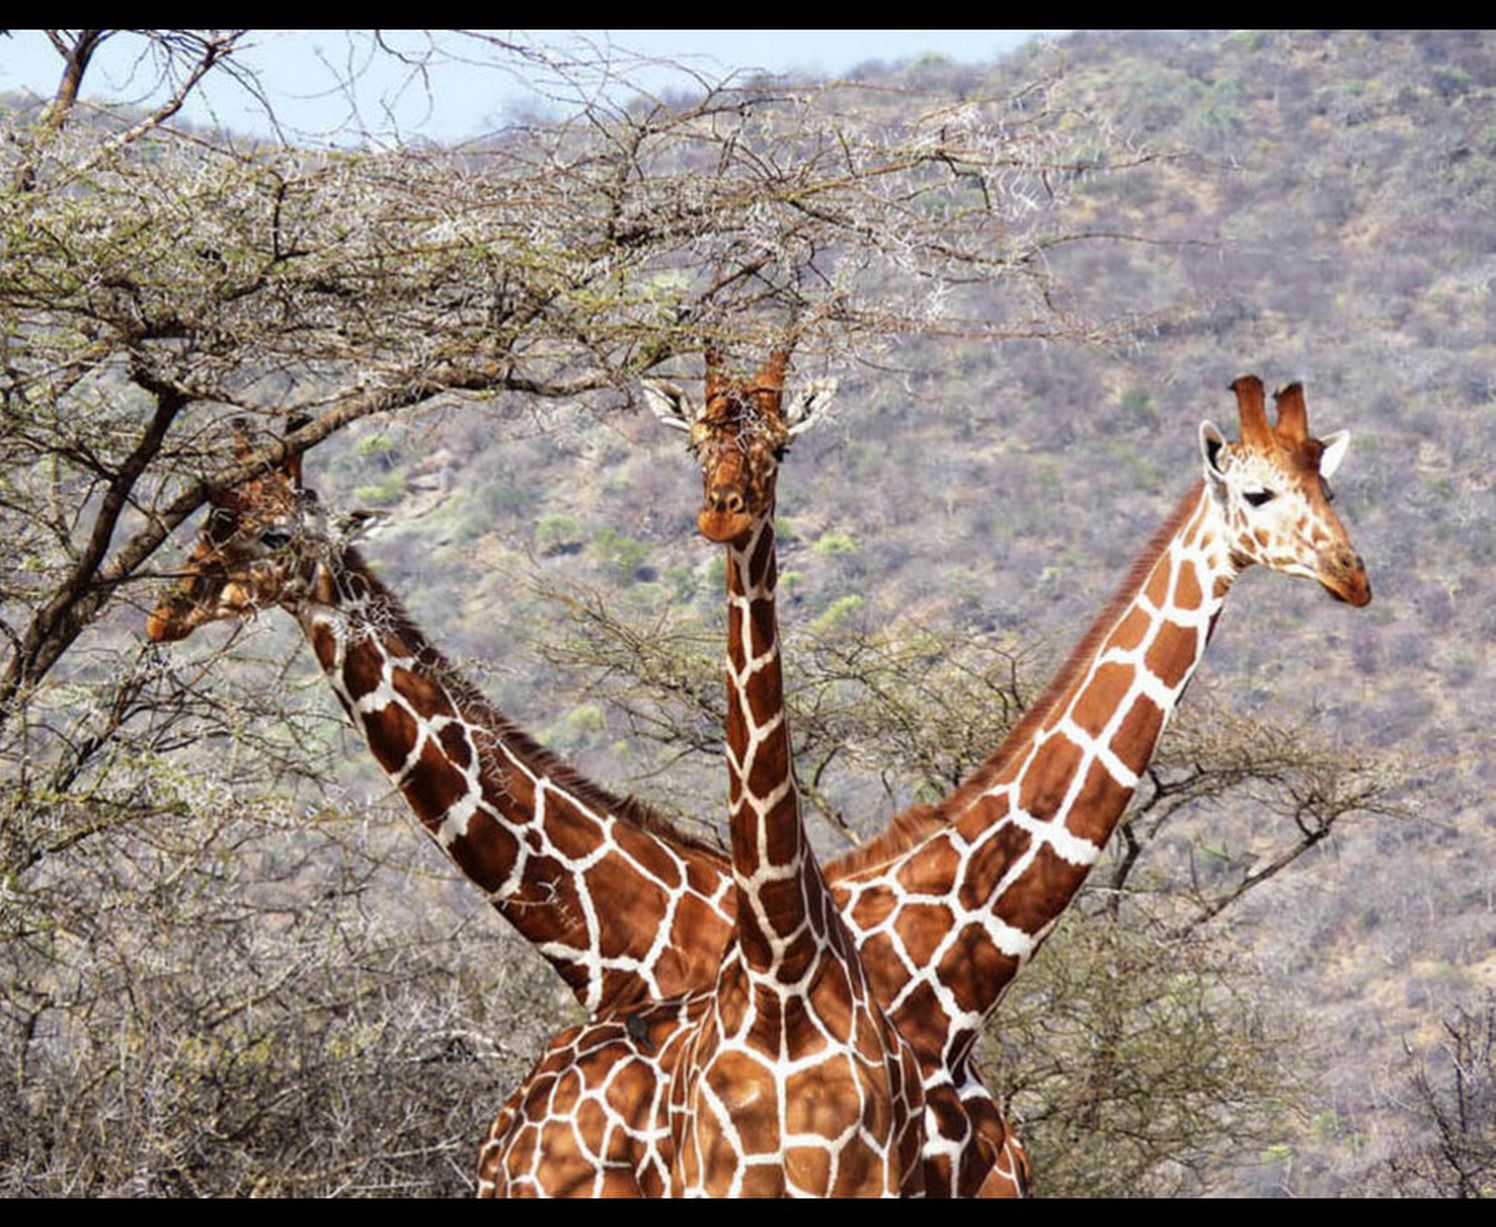 A three-headed giraffe is something you don't see everyday